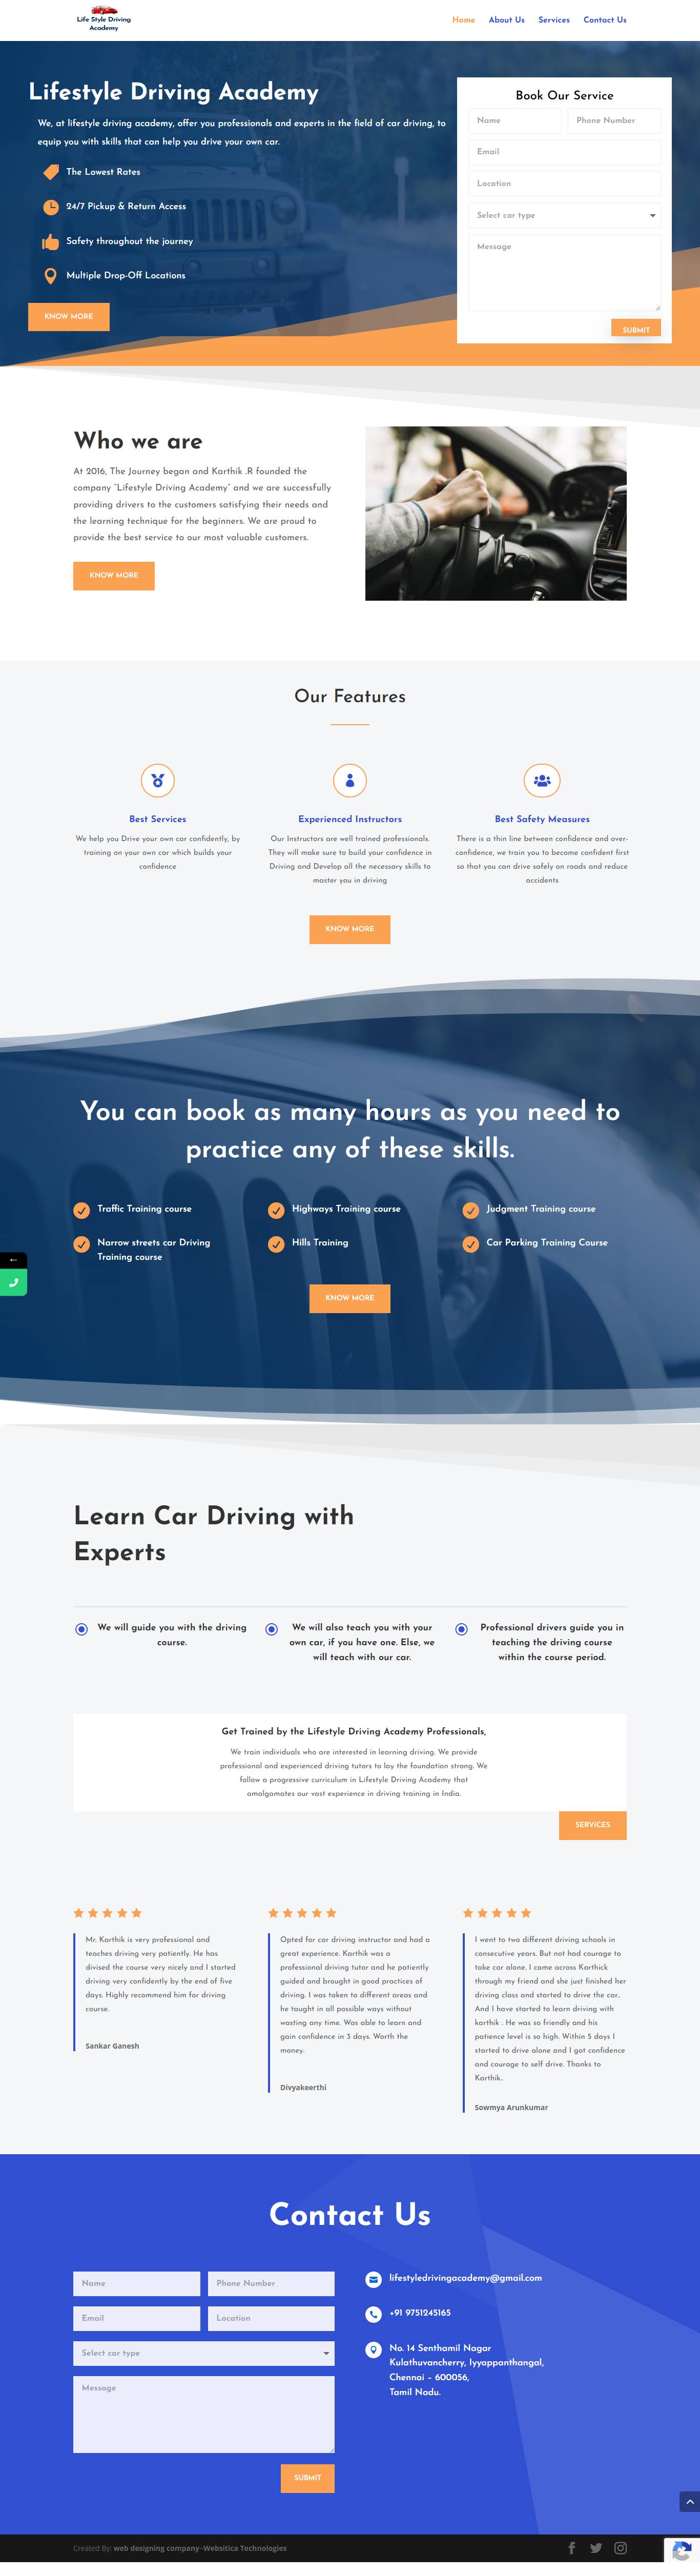 Lifestyle Driving Academy